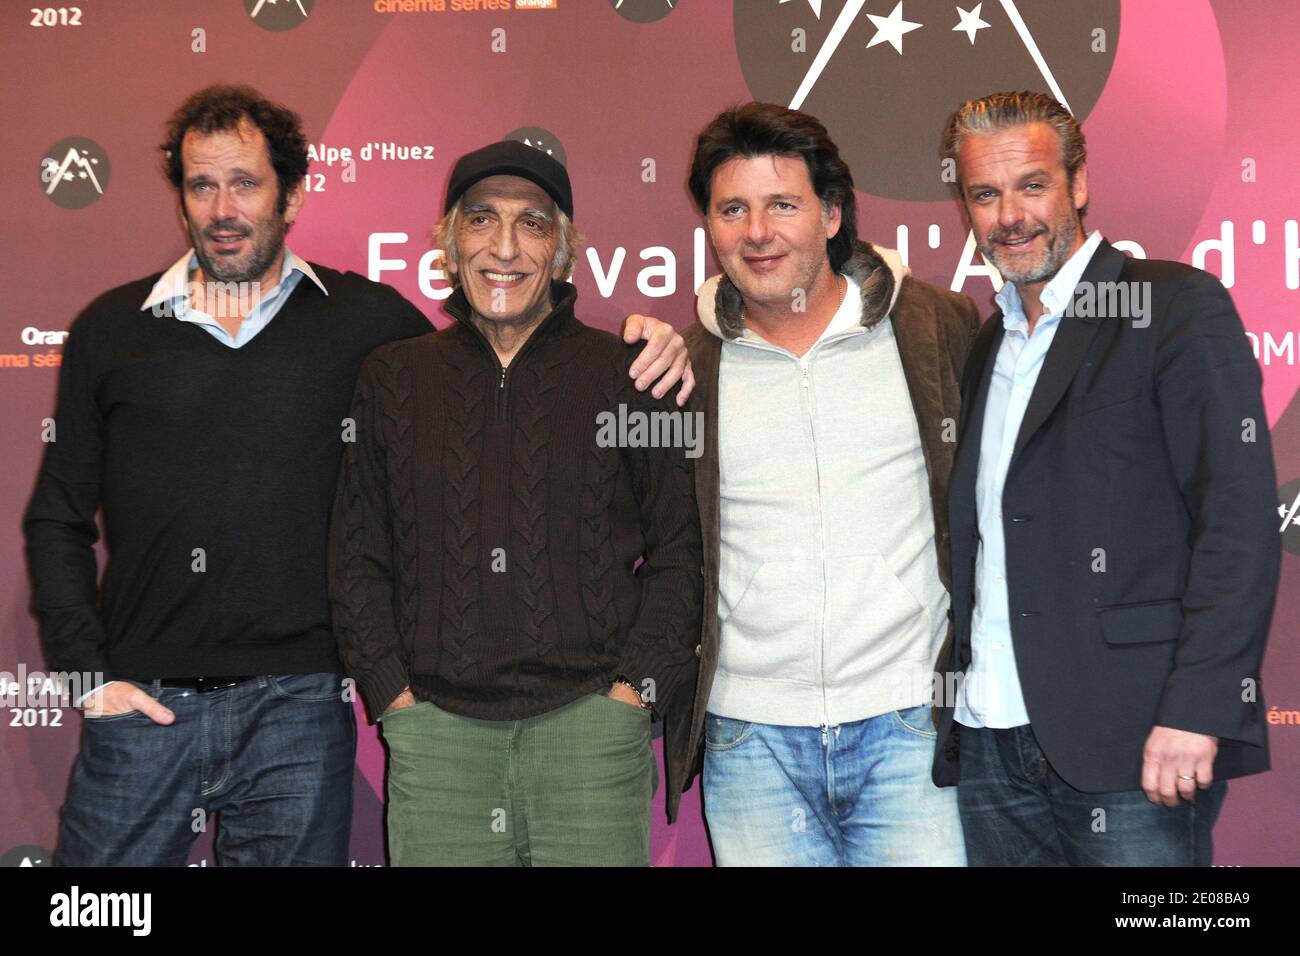 Christian Vadim, Gerard Darmon, Philippe lellouche and David Brecourt posing at 'La Clinique De L'Amour' photocall as part of the 15th Alpe d'Huez Comedy Film Festival held at l'Alpe d'Huez, France, on January 18, 2012. Photo by Charriau-Marechal/ABACAPRESS.COM Stock Photo